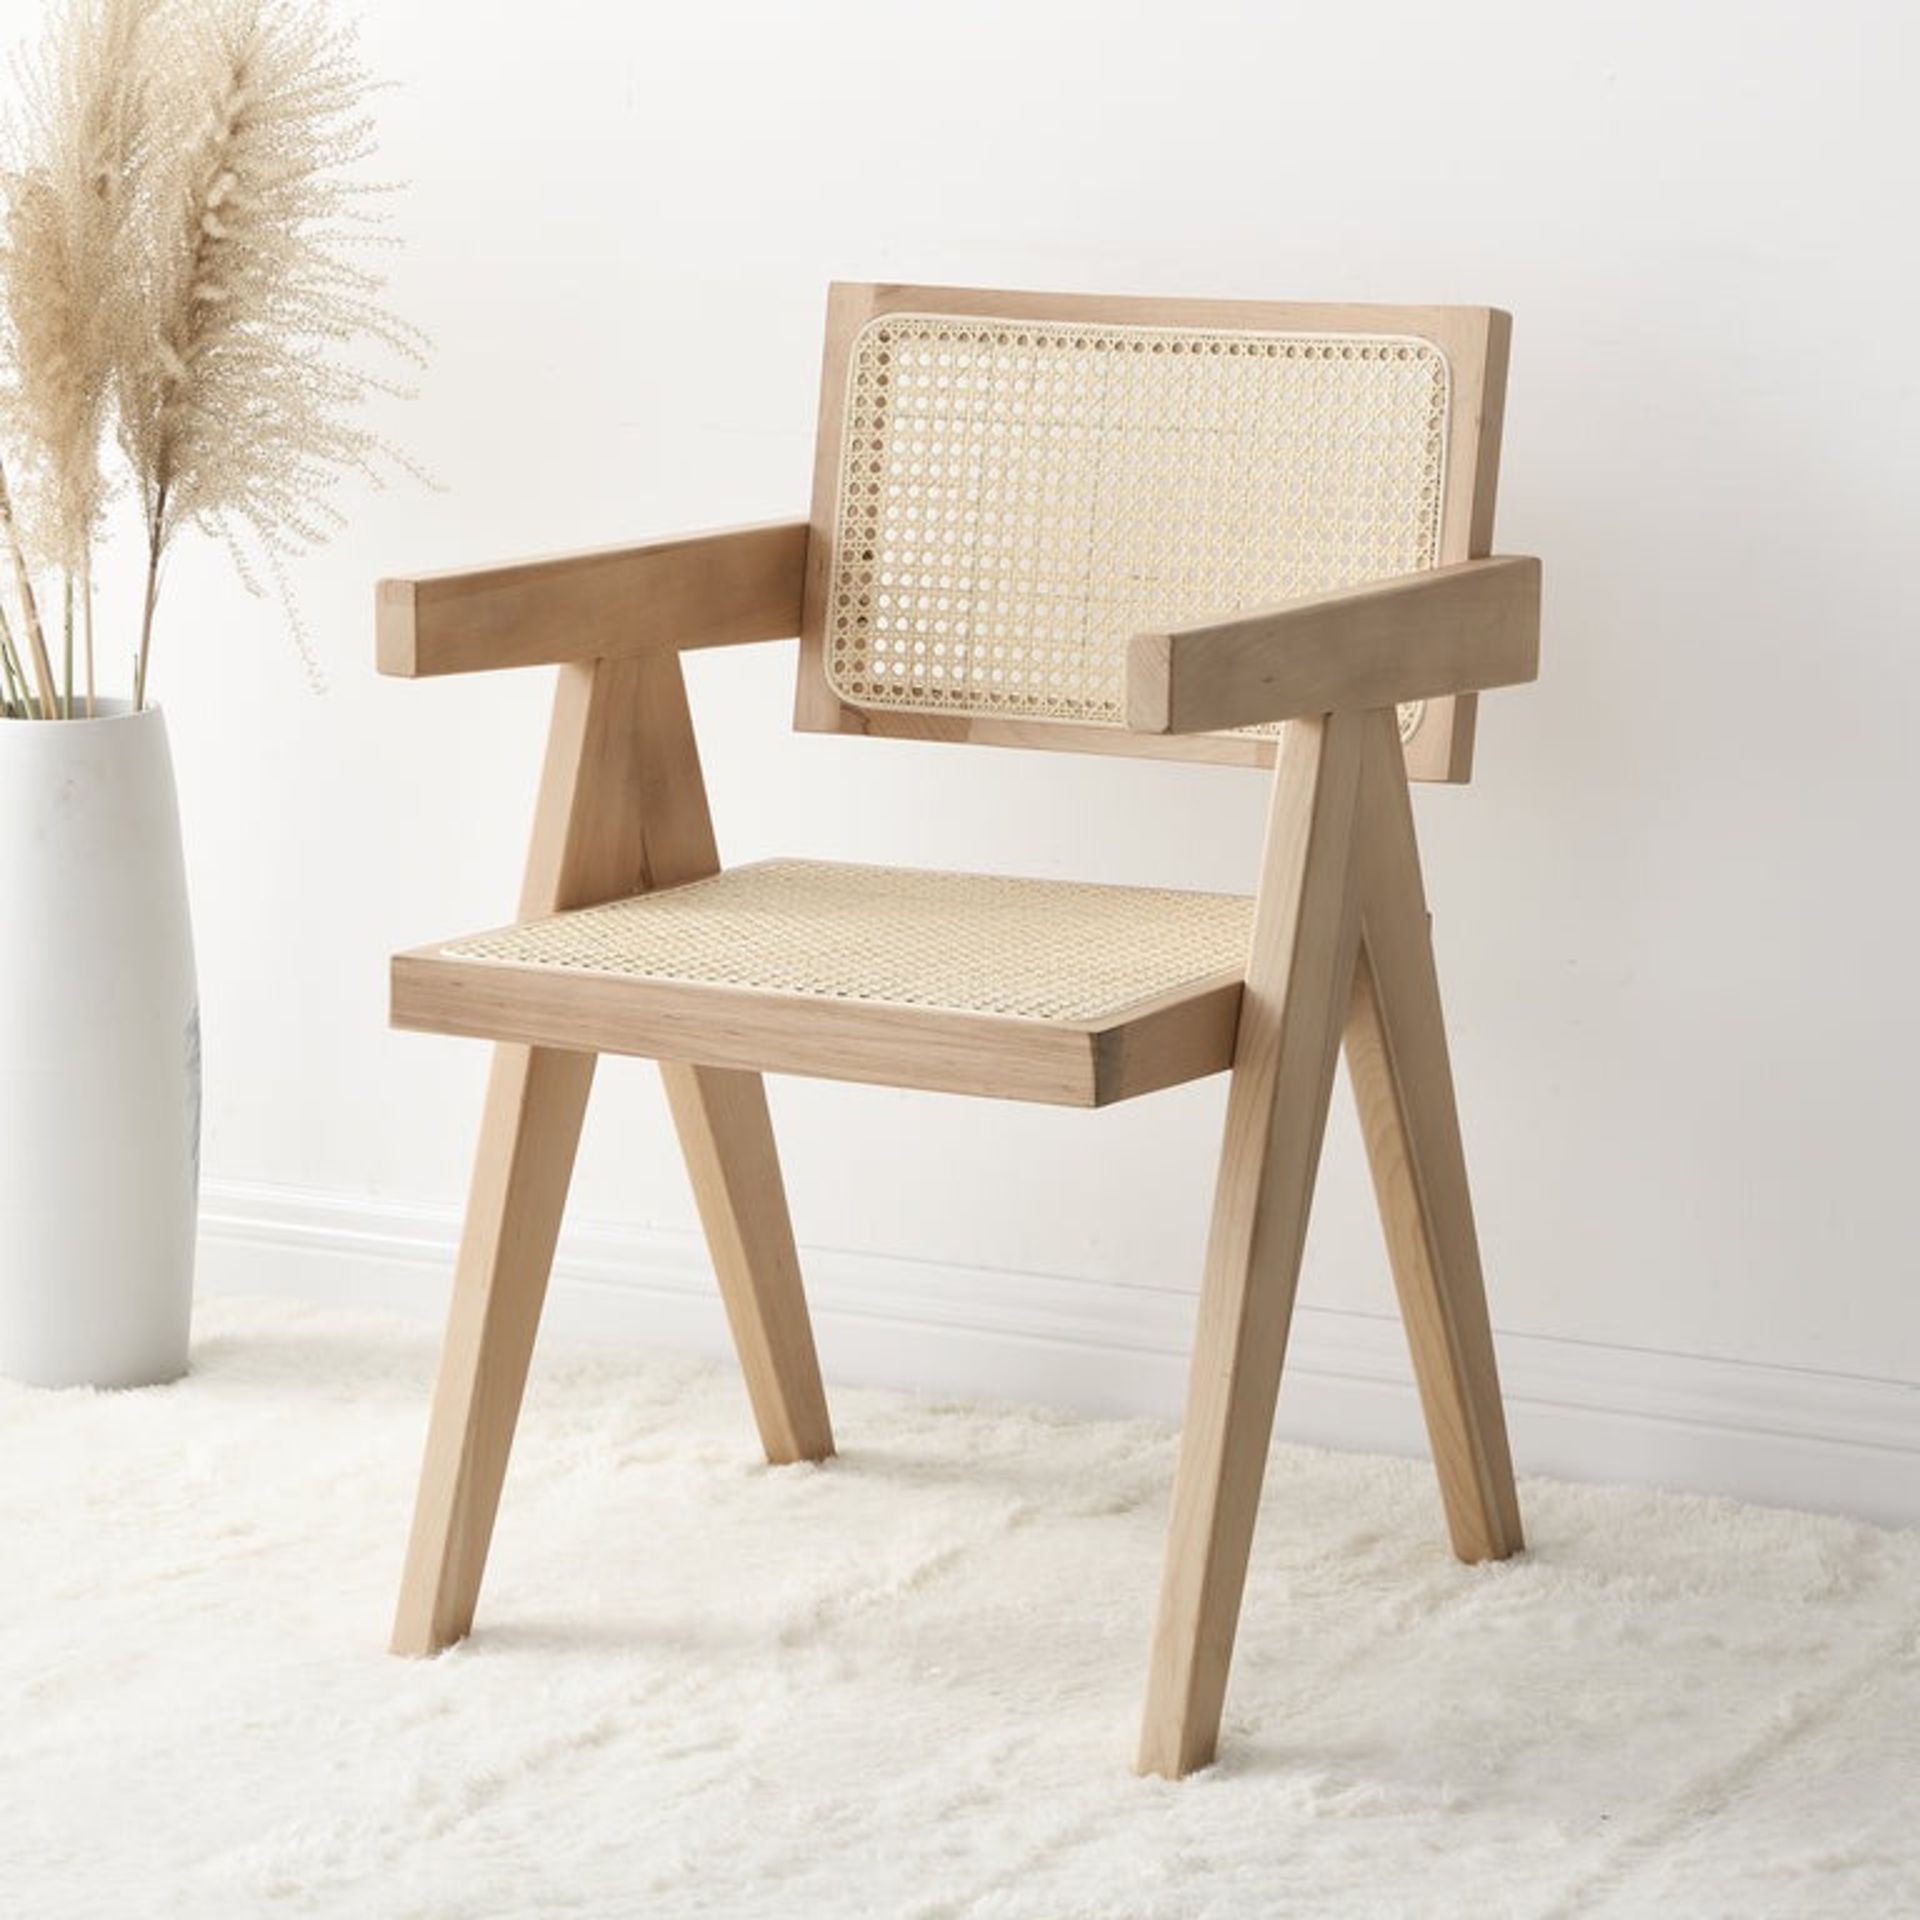 Jeanne Natural Colour Cane Rattan Solid Beech Wood Dining Chair (R30) RRP £169.99